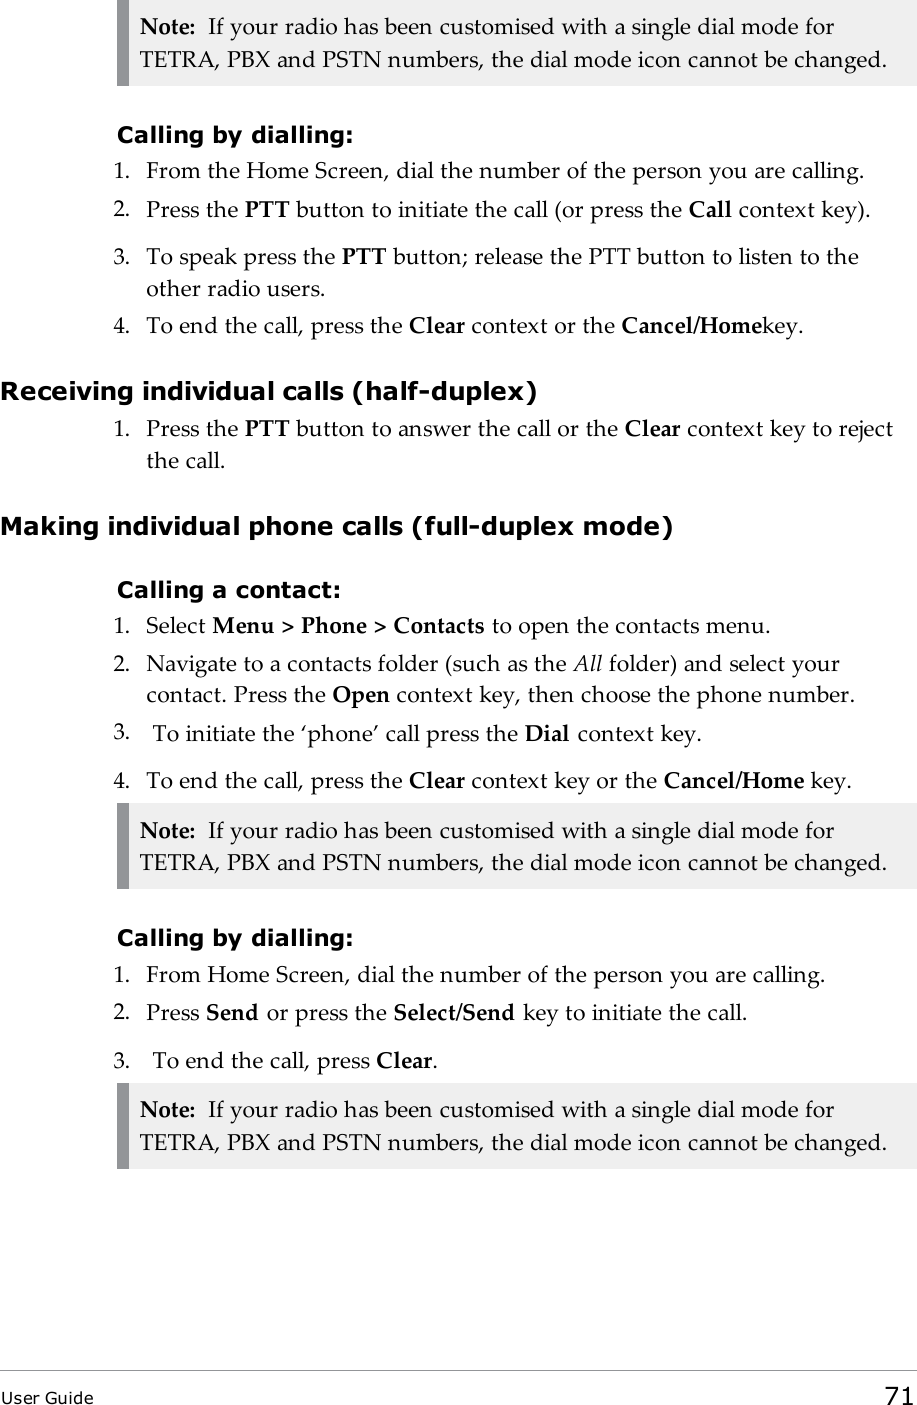 Note: If your radio has been customised with a single dial mode forTETRA, PBX and PSTN numbers, the dial mode icon cannot be changed.Calling by dialling:1. From the Home Screen, dial the number of the person you are calling.2. Press the PTT button to initiate the call (or press the Call context key).3. To speak press the PTT button; release the PTT button to listen to theother radio users.4. To end the call, press the Clear context or the Cancel/Homekey.Receiving individual calls (half-duplex)1. Press the PTT button to answer the call or the Clear context key to rejectthe call.Making individual phone calls (full-duplex mode)Calling a contact:1. Select Menu &gt; Phone &gt; Contacts to open the contacts menu.2. Navigate to a contacts folder (such as the All folder) and select yourcontact. Press the Open context key, then choose the phone number.3. To initiate the ‘phone’ call press the Dial context key.4. To end the call, press the Clear context key or the Cancel/Home key.Note: If your radio has been customised with a single dial mode forTETRA, PBX and PSTN numbers, the dial mode icon cannot be changed.Calling by dialling:1. From Home Screen, dial the number of the person you are calling.2. Press Send or press the Select/Send key to initiate the call.3. To end the call, press Clear.Note: If your radio has been customised with a single dial mode forTETRA, PBX and PSTN numbers, the dial mode icon cannot be changed.User Guide 71